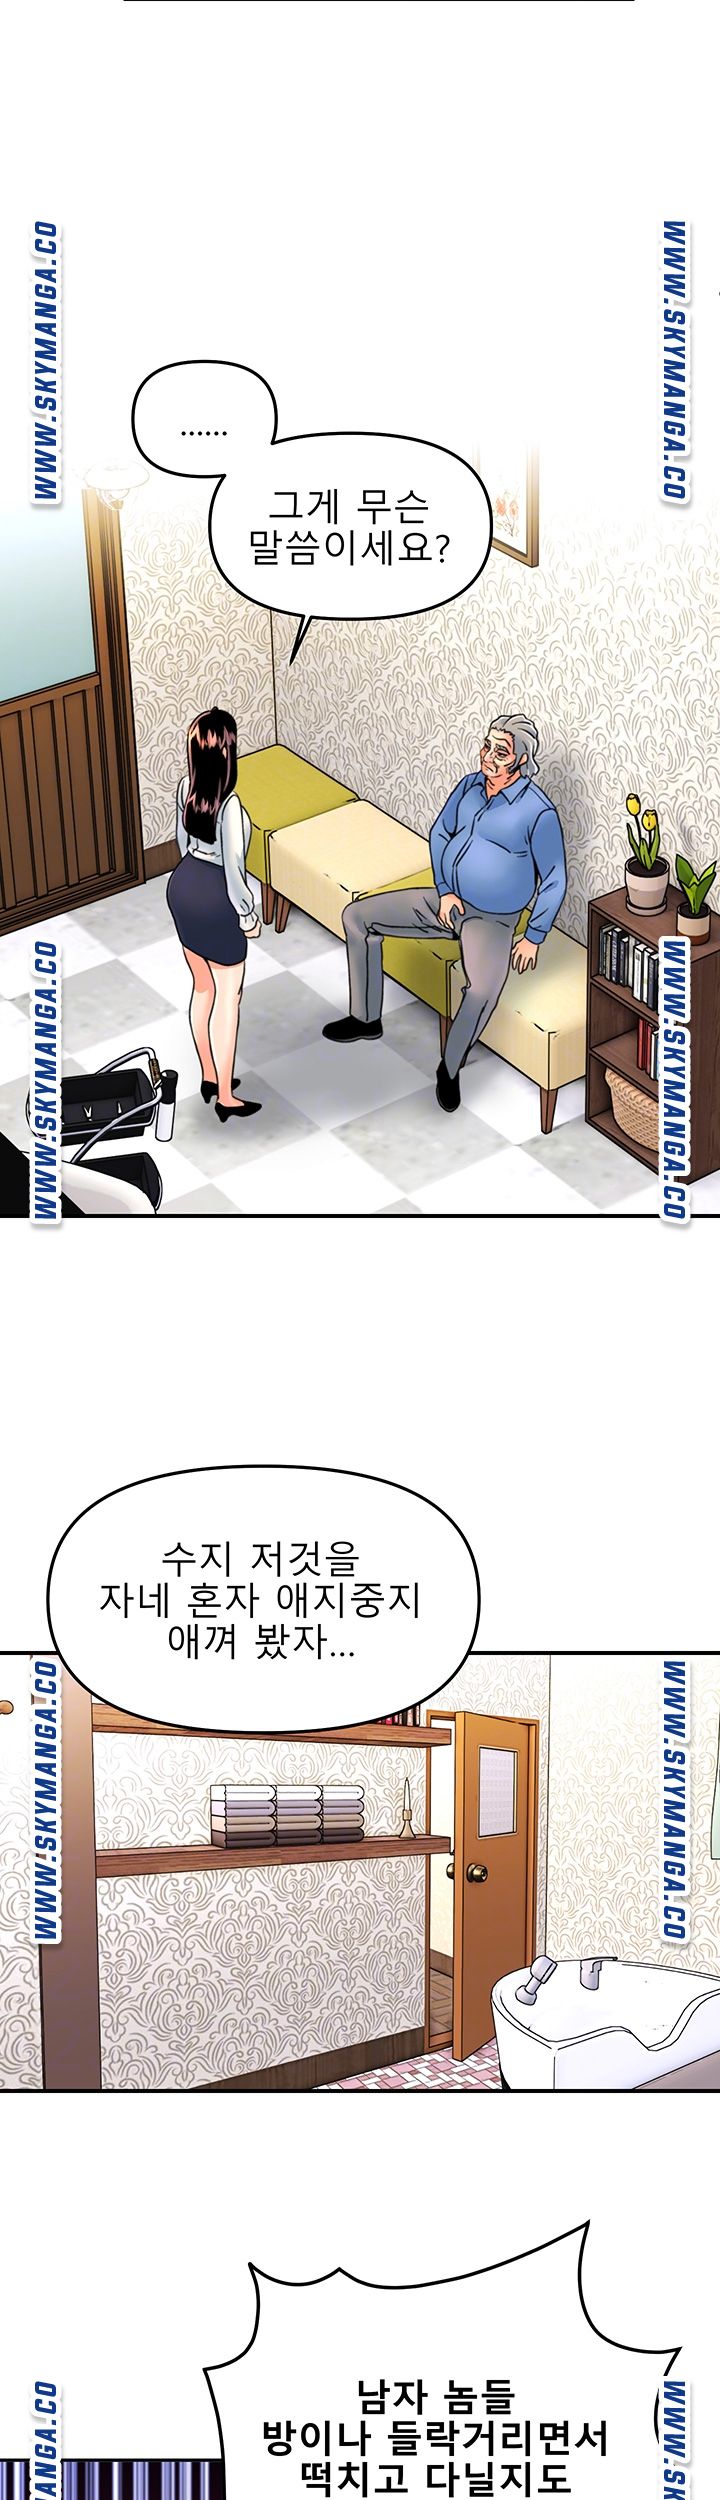 Beauty Salon Sisters Raw - Chapter 27 Page 9